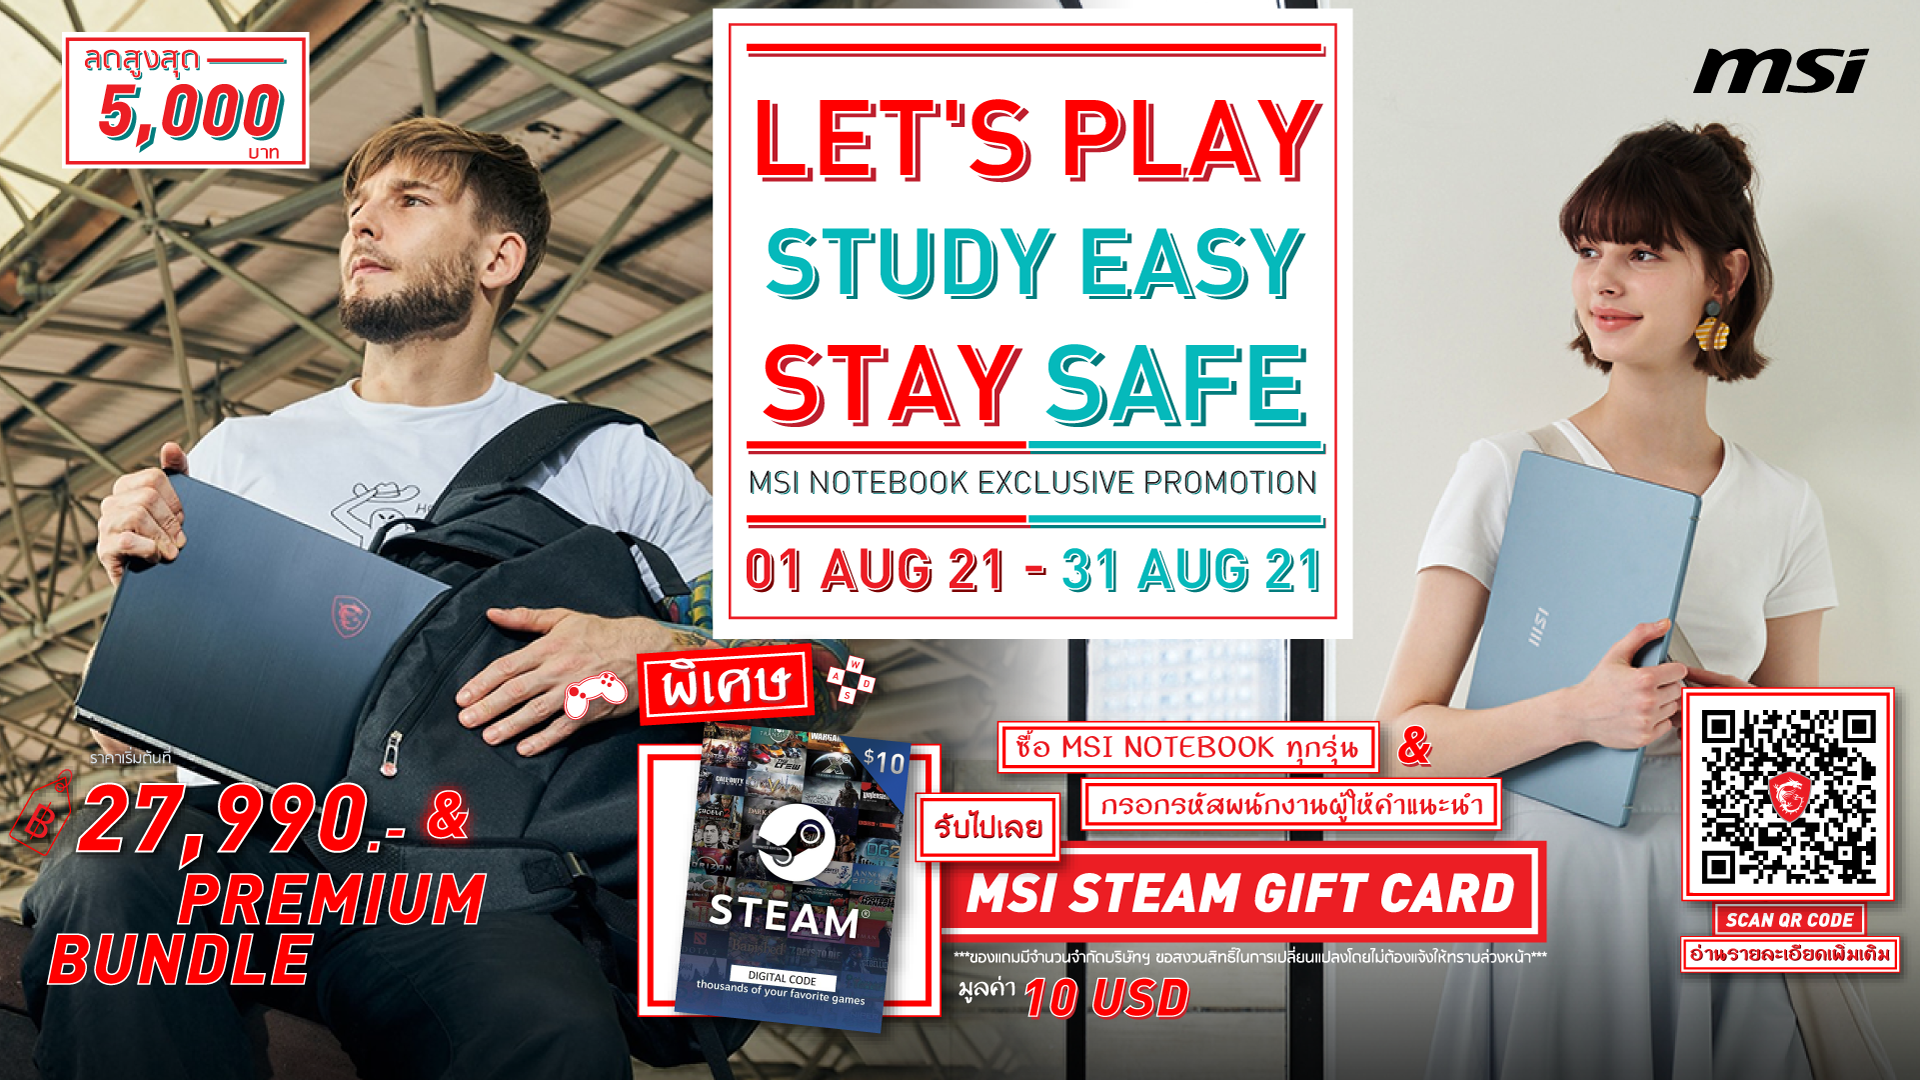 001 MSI Learn & Play Stay safe with MSI Exclusive Promotion 2021